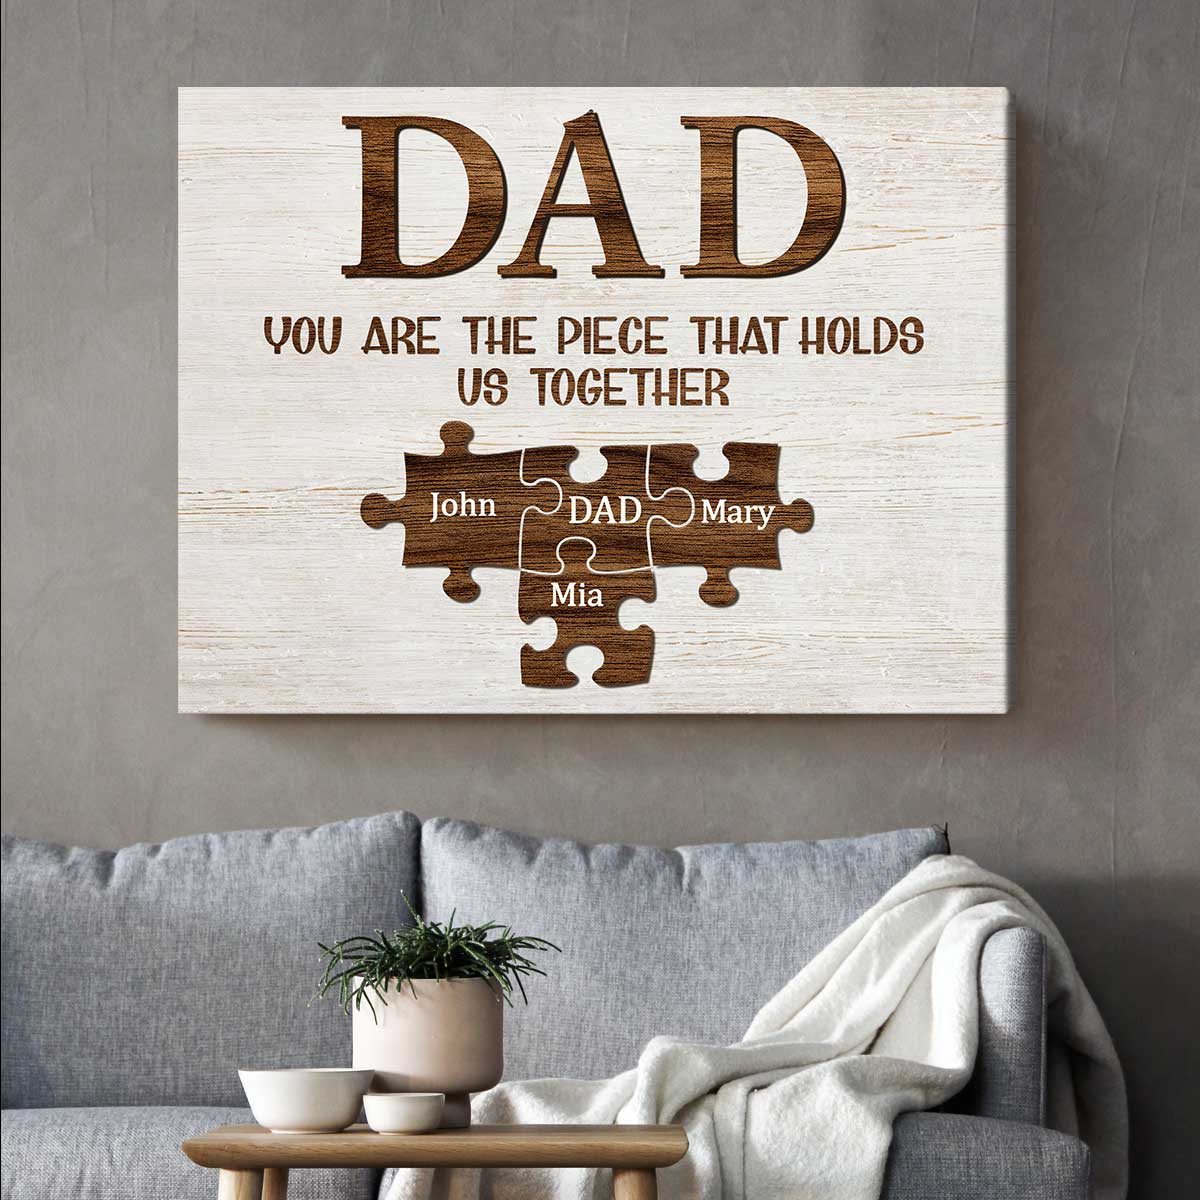 PresentsPrints, Dads Fathers Day Gifts, Personalized Dad Gifts, You Are The Piece That Holds Us Together, Canvas Wall Art